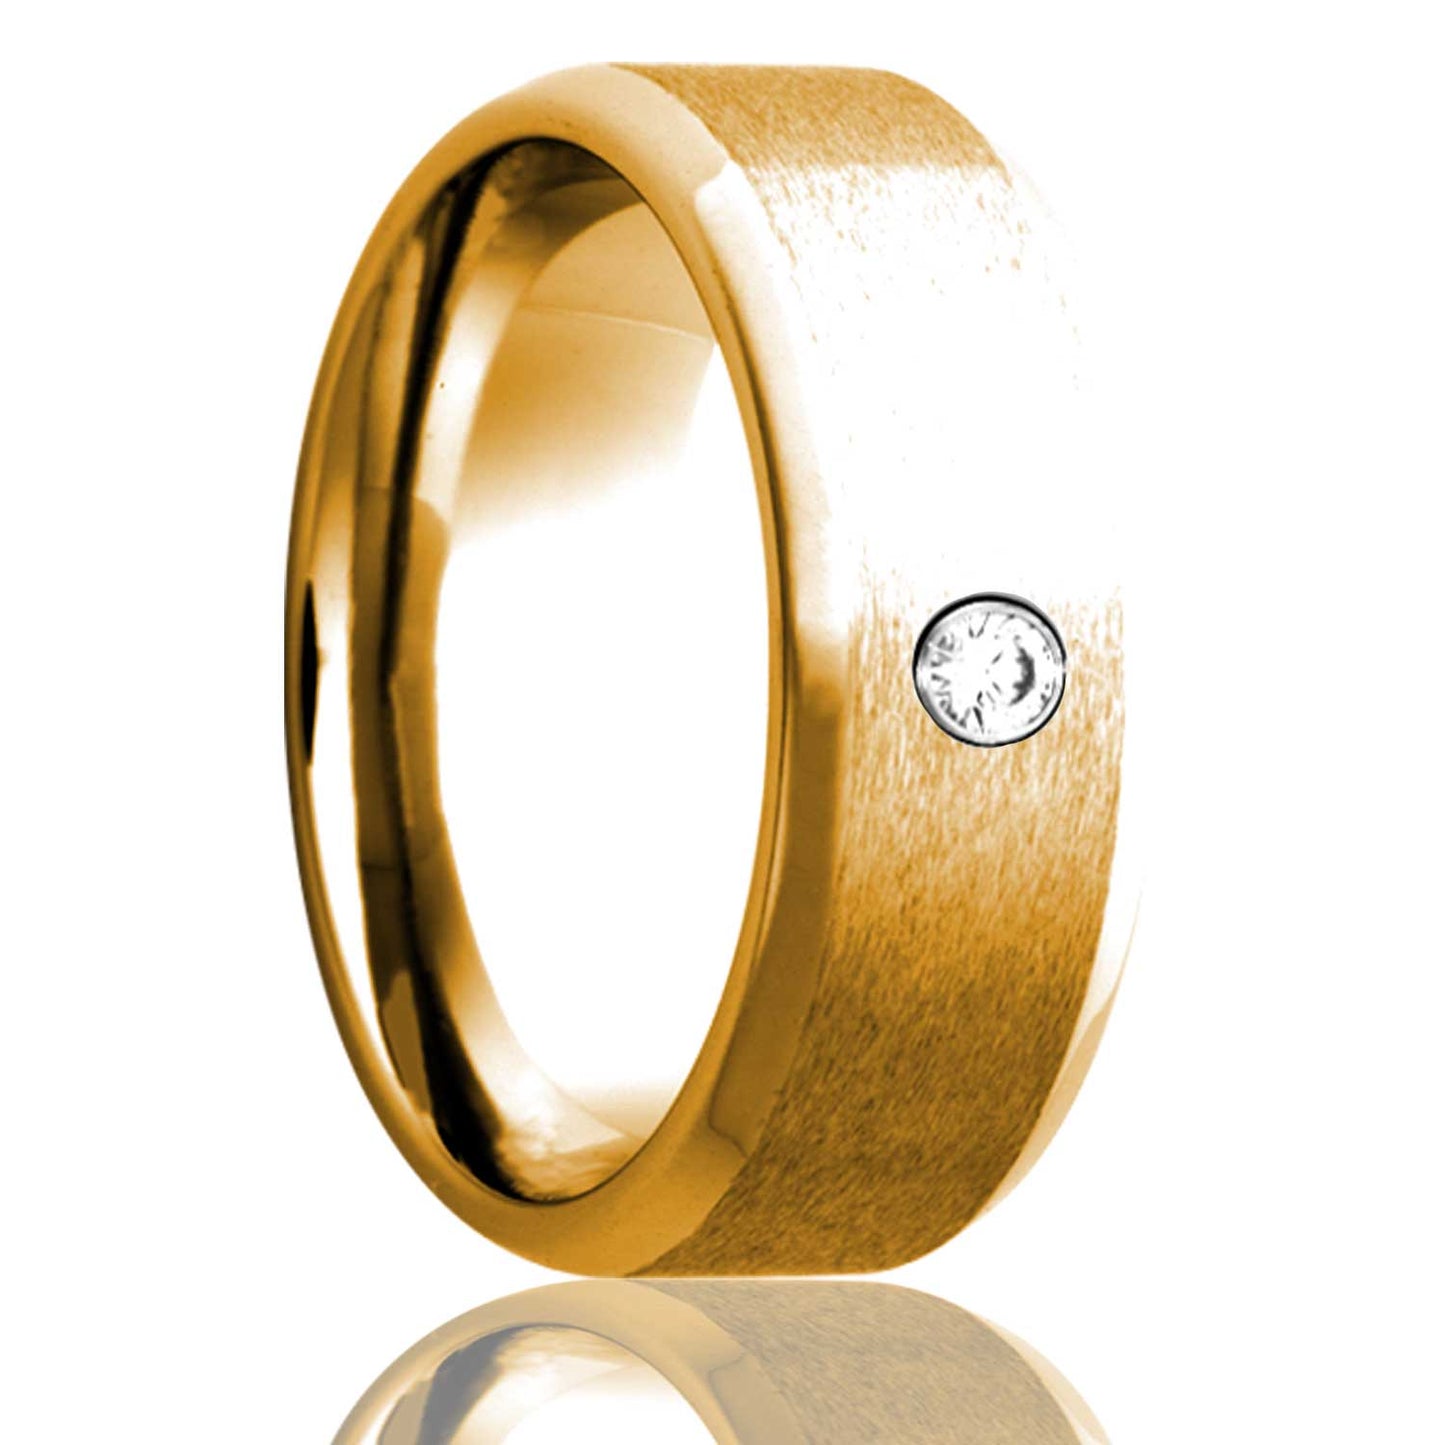 A satin finish 14k gold wedding band with beveled edges and diamond displayed on a neutral white background.